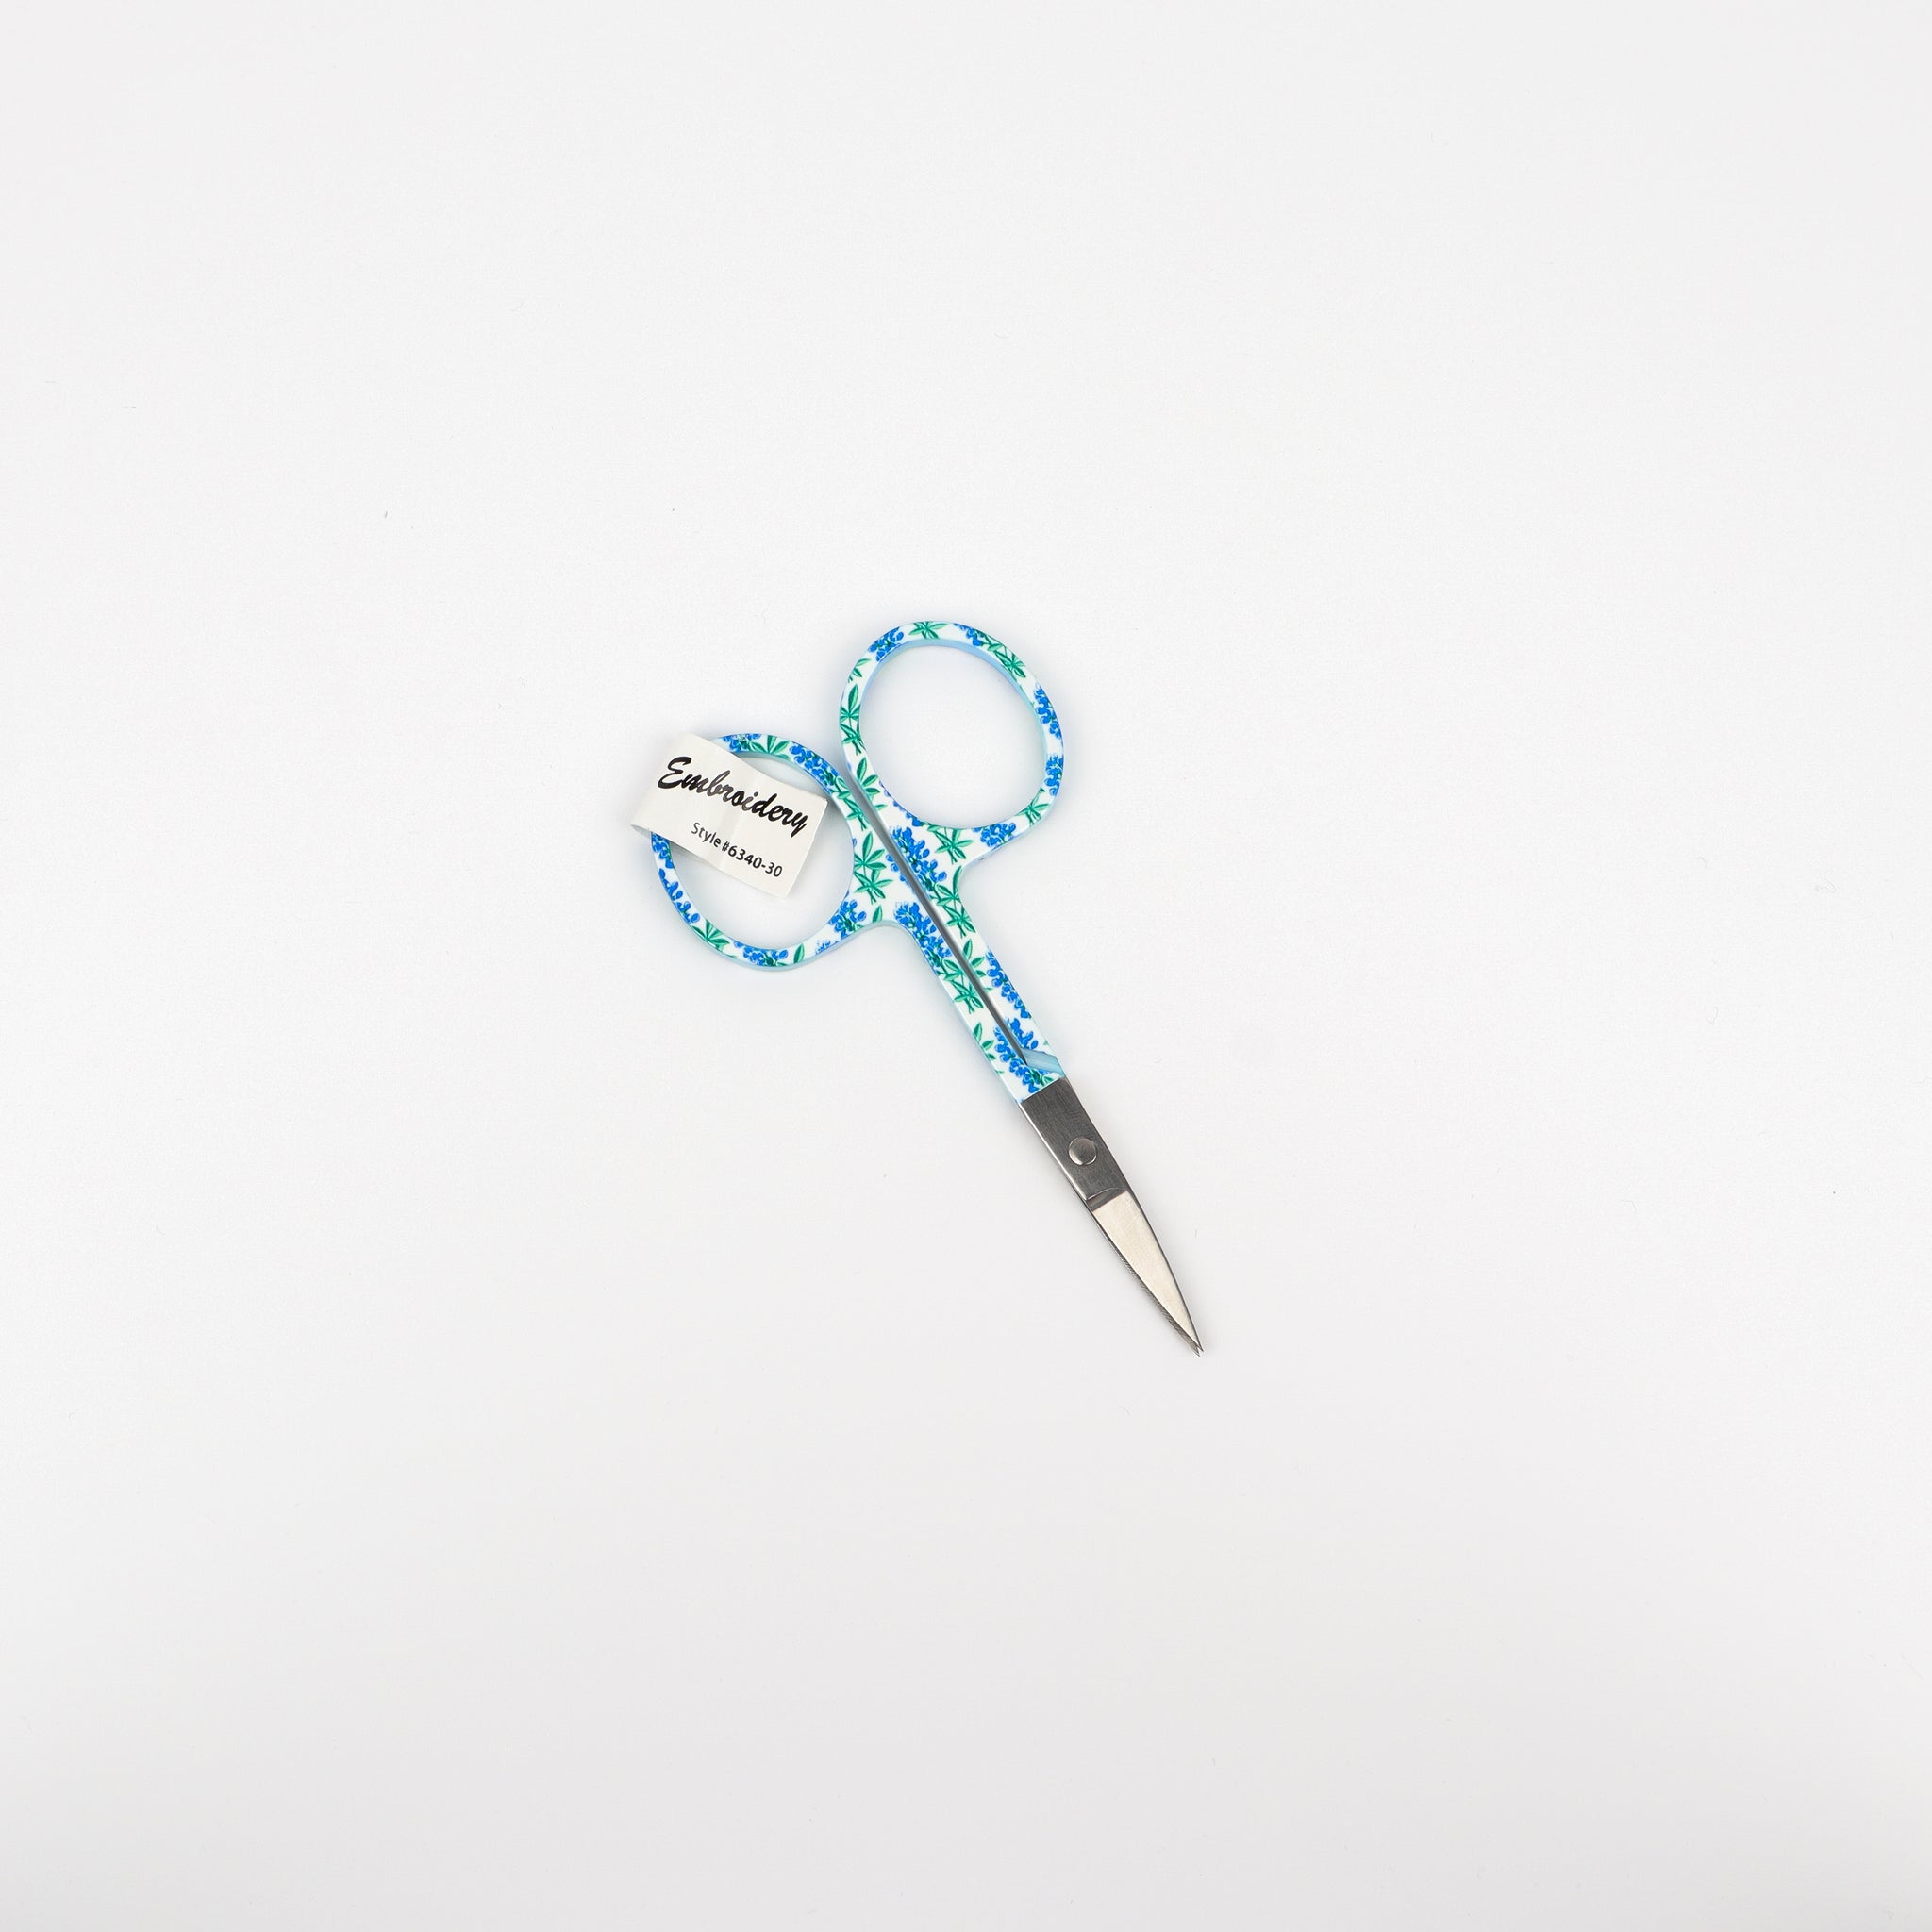 Floral Scissors Embroidery